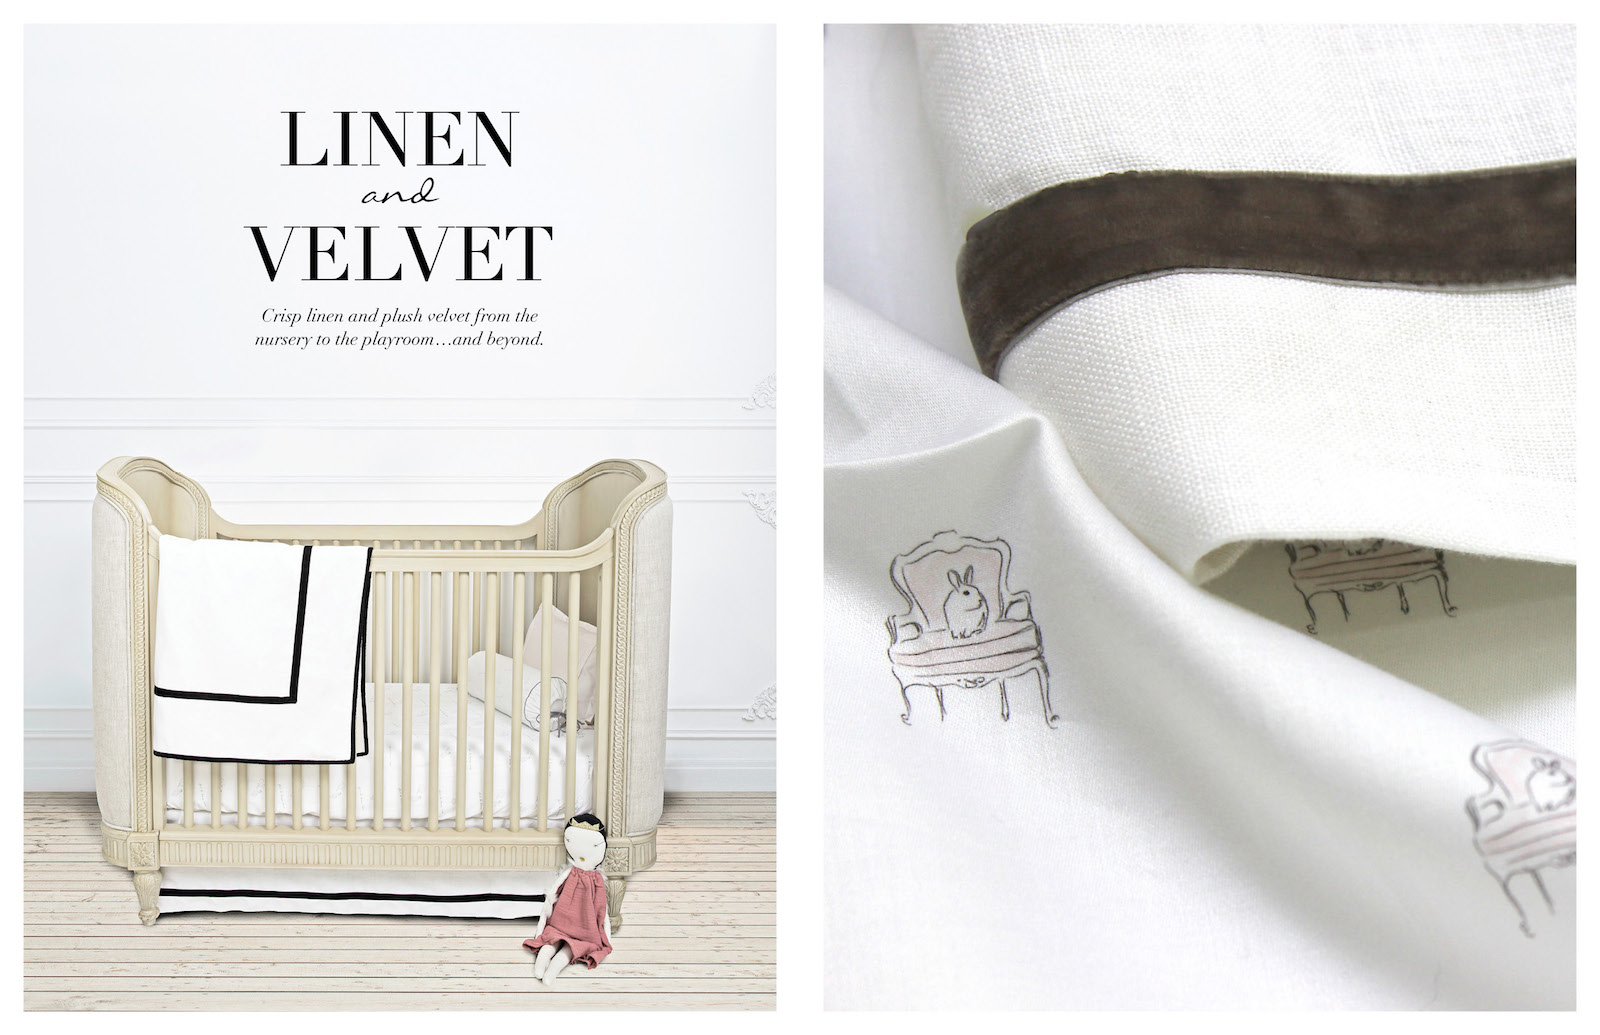 Pemberley Rose Lookbook-Mlle Lapin Bunny Crib and Girl Sheeting Featured with Velvet Trim Linen Bedding Collection